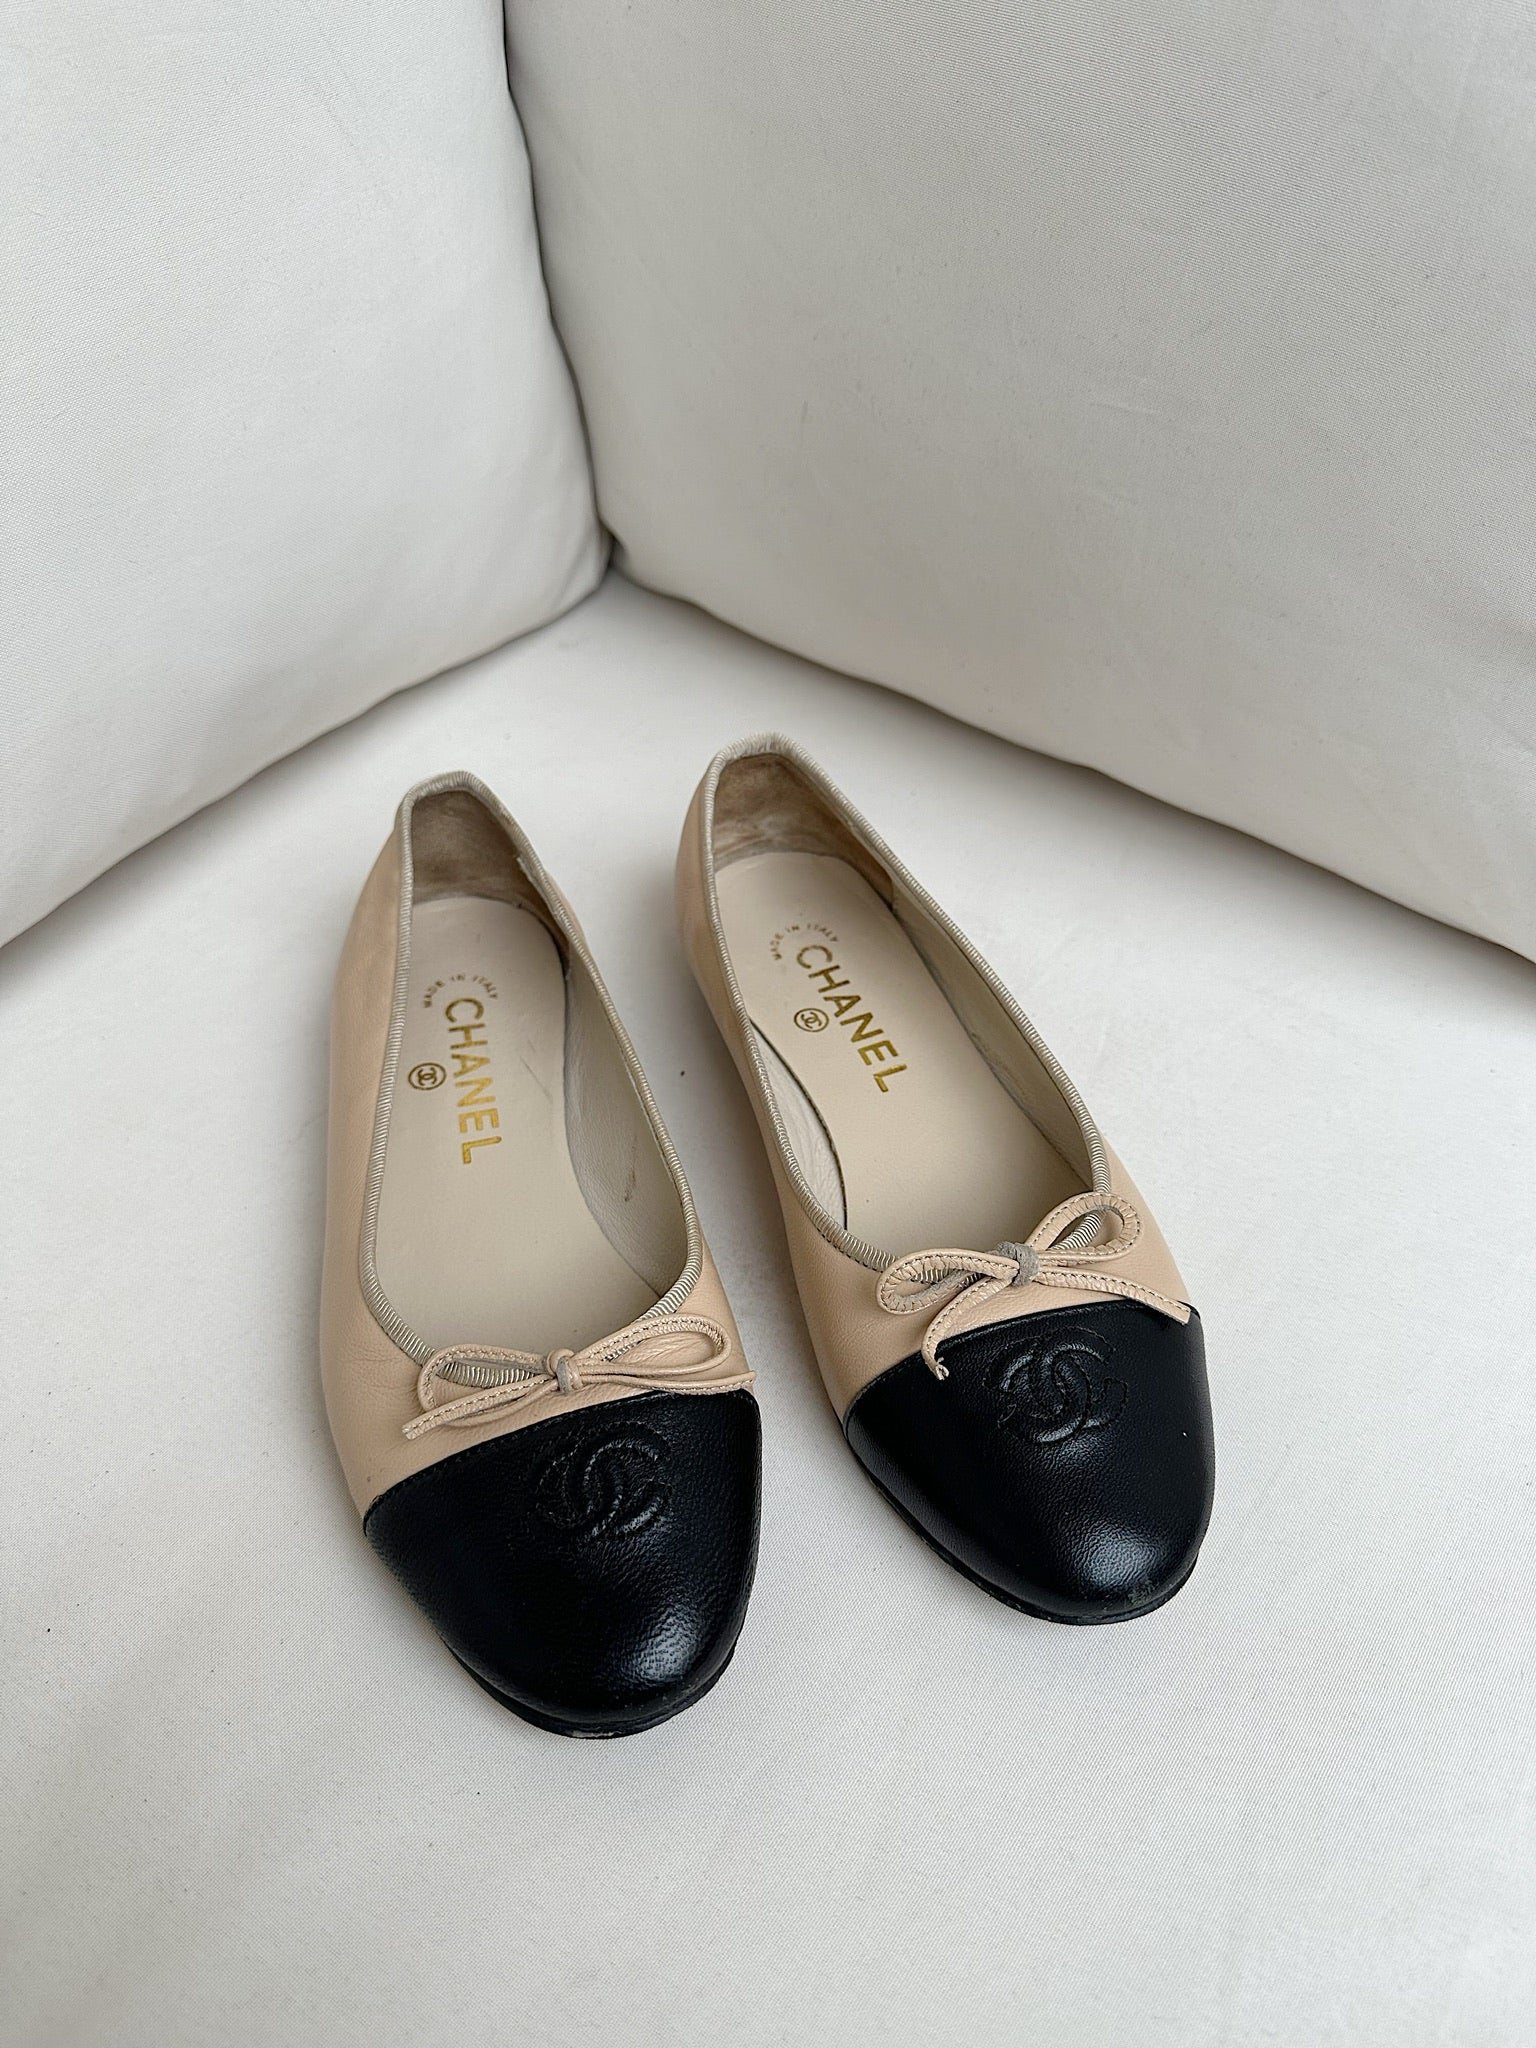 chanel gold ballerina shoes